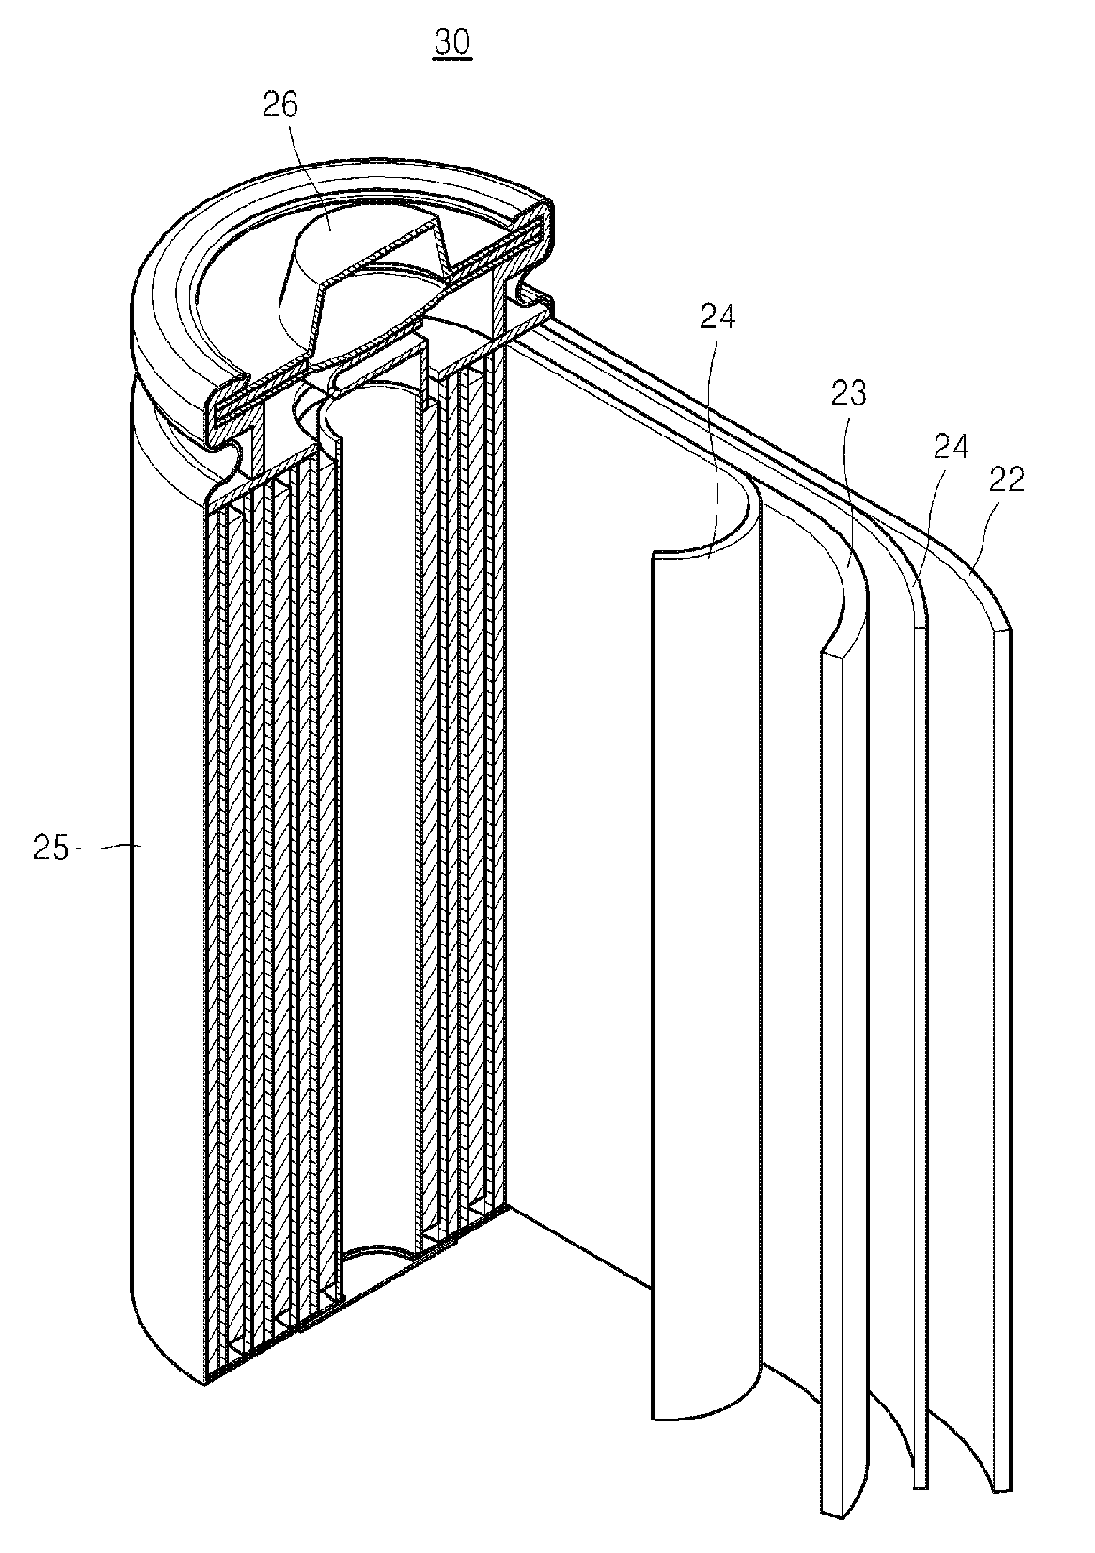 Composite anode active material, anode including the composite anode active material, lithium battery including the anode, and method of preparing the composite anode active material